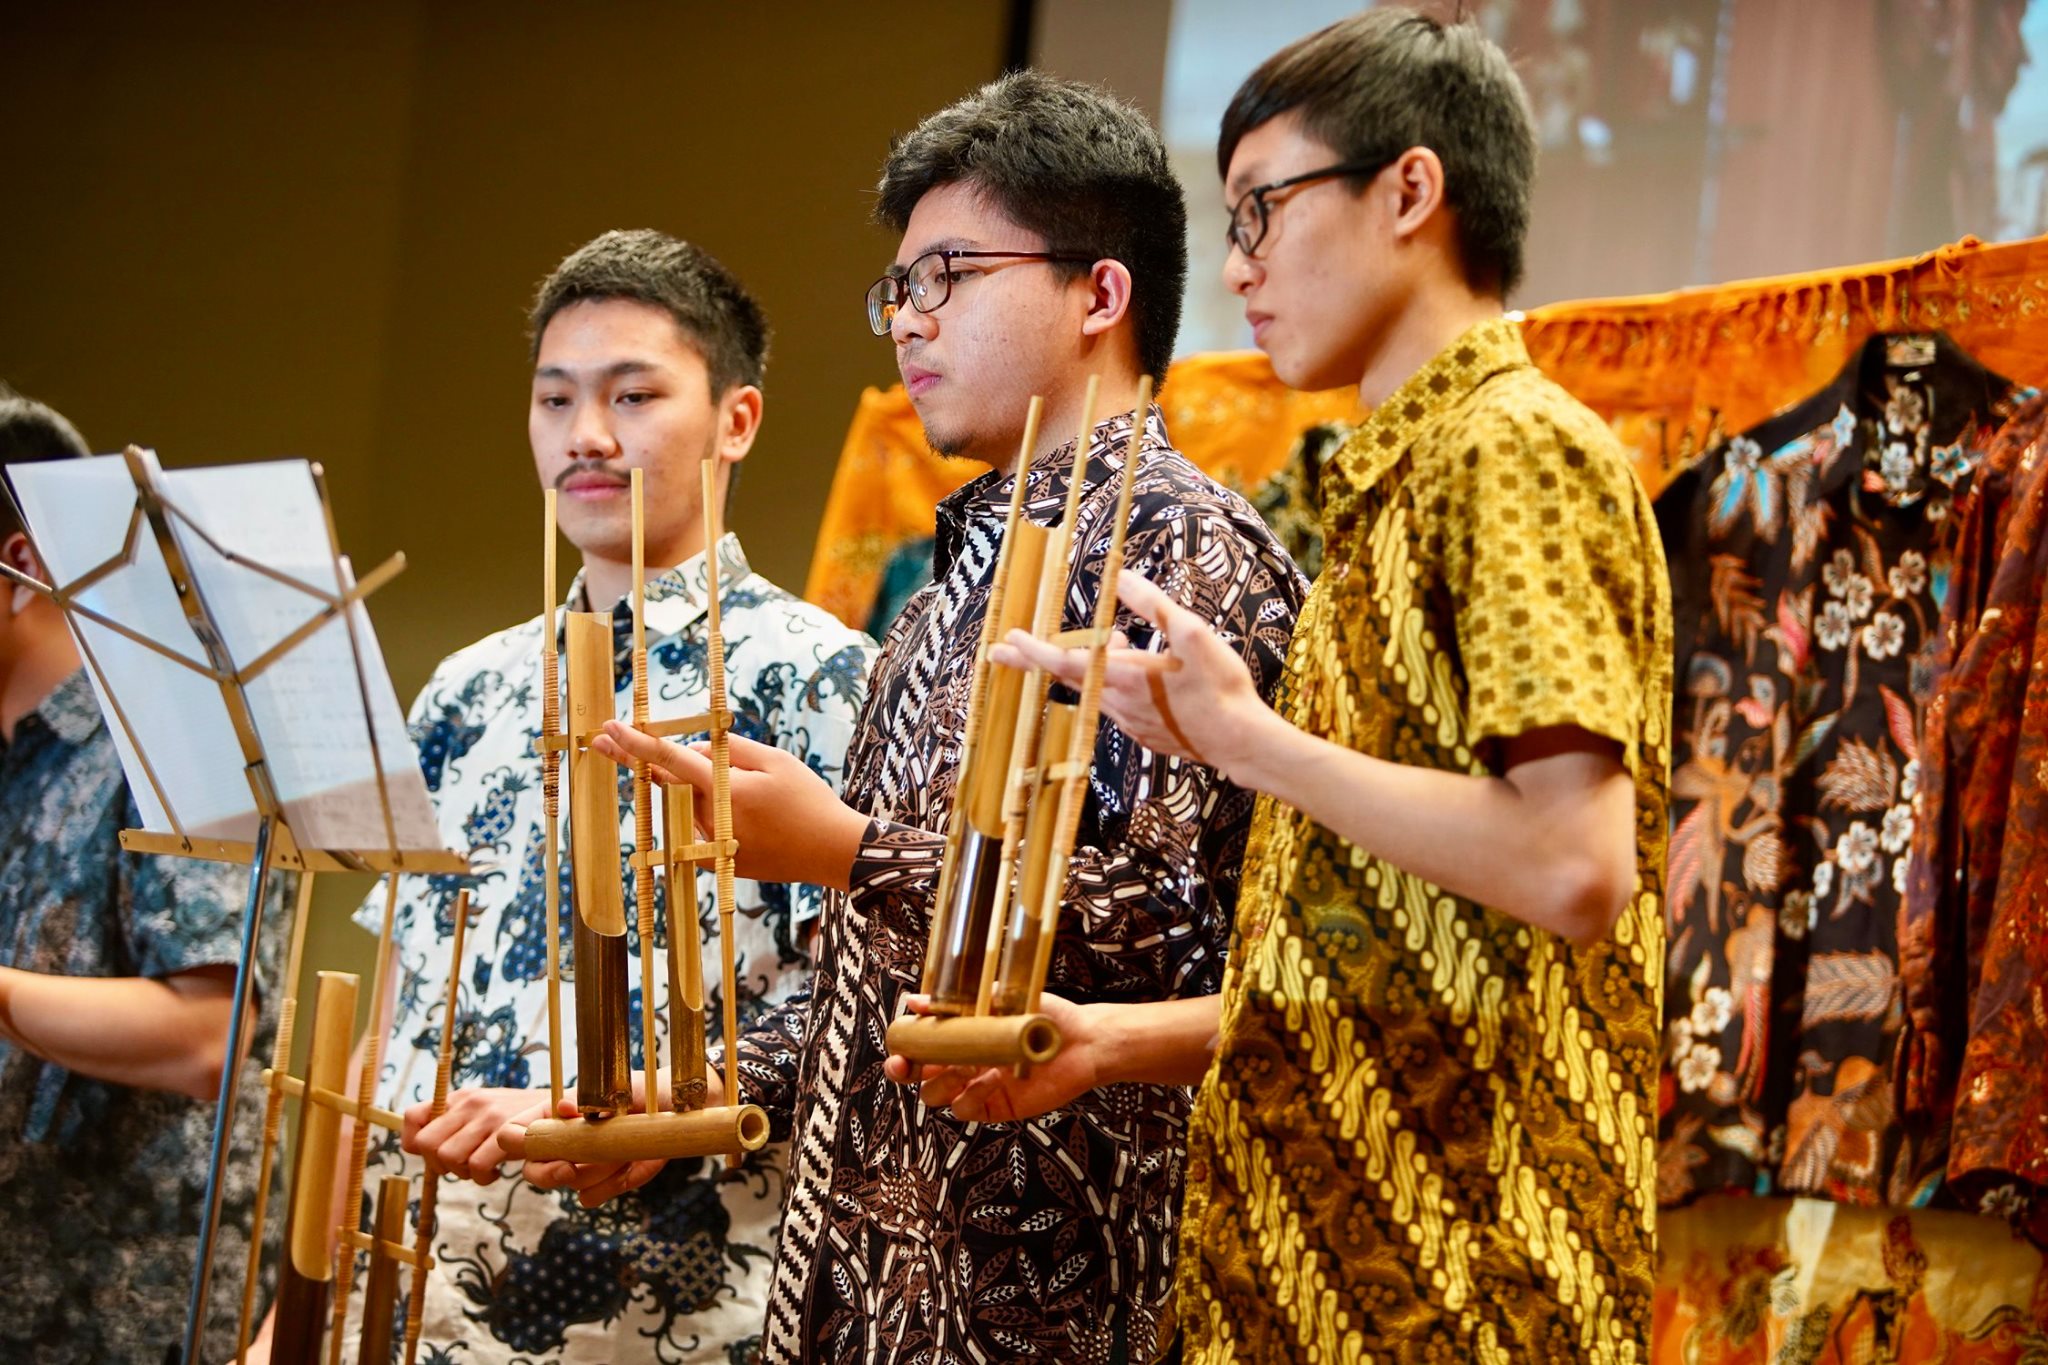 students playing traditional wood instruments